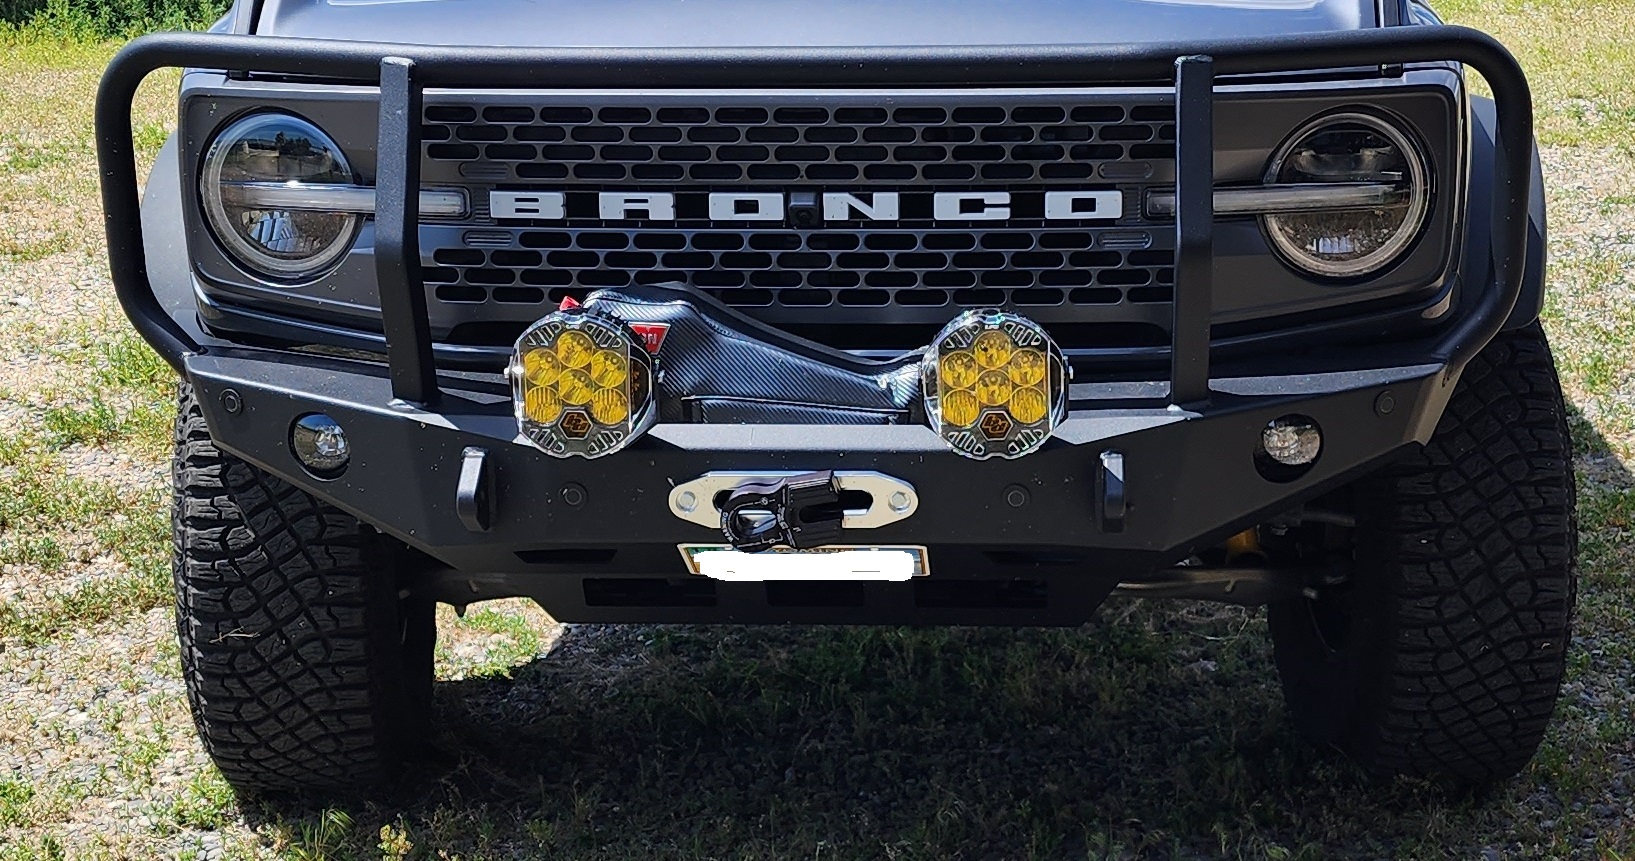 Ford Bronco Expedition One front bumper and Baja Design LP6 lights crop 2